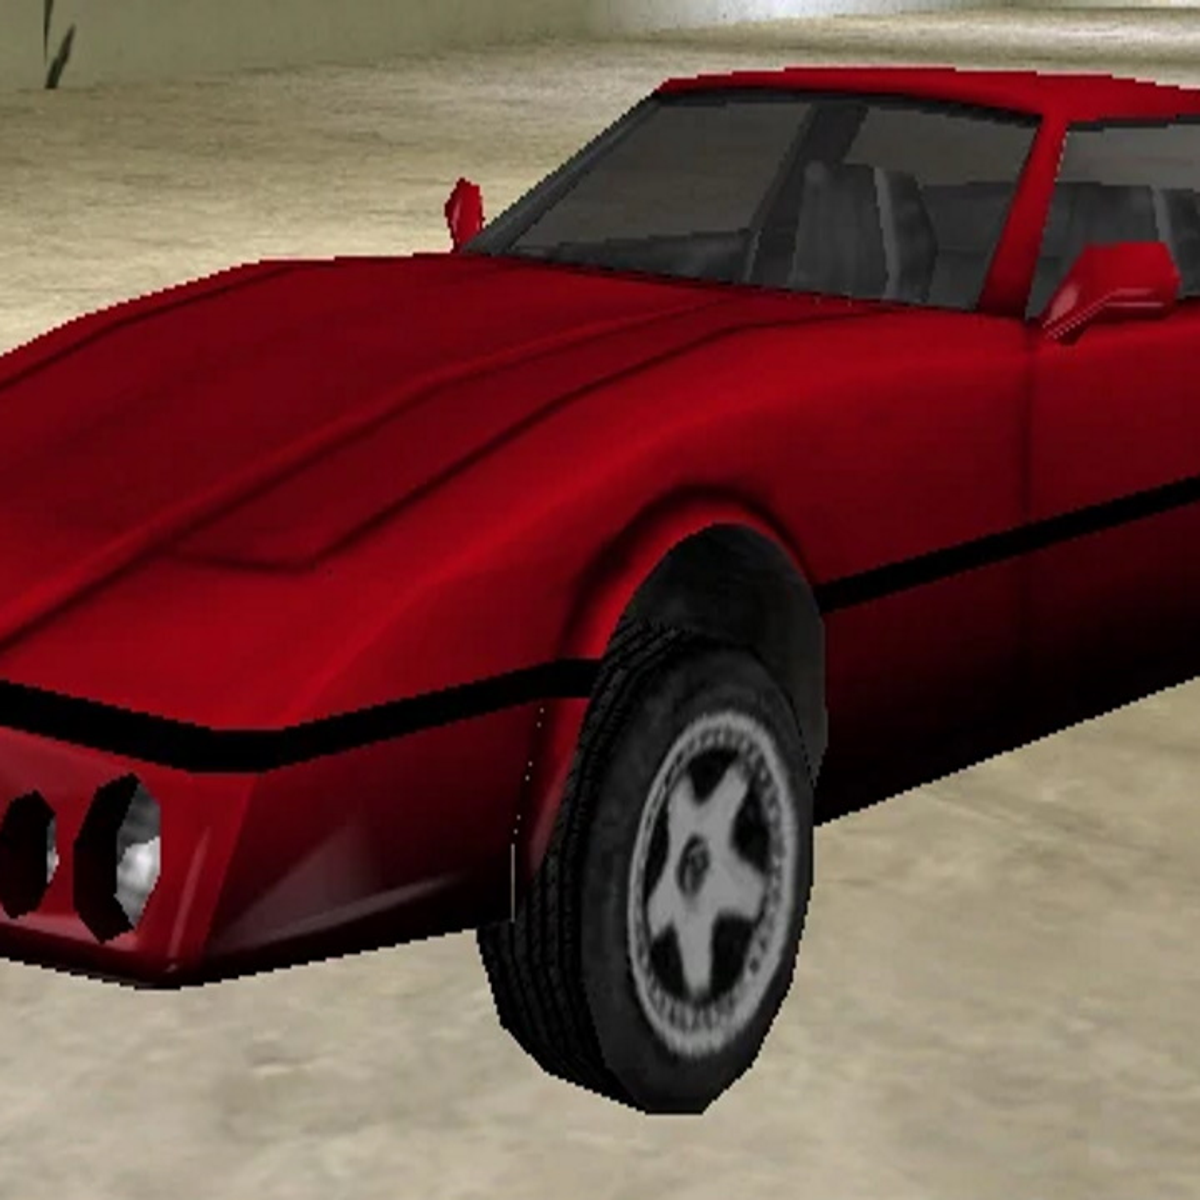 The fastest cars in GTA Vice City - Hotring, Stinger, Phoenix, and